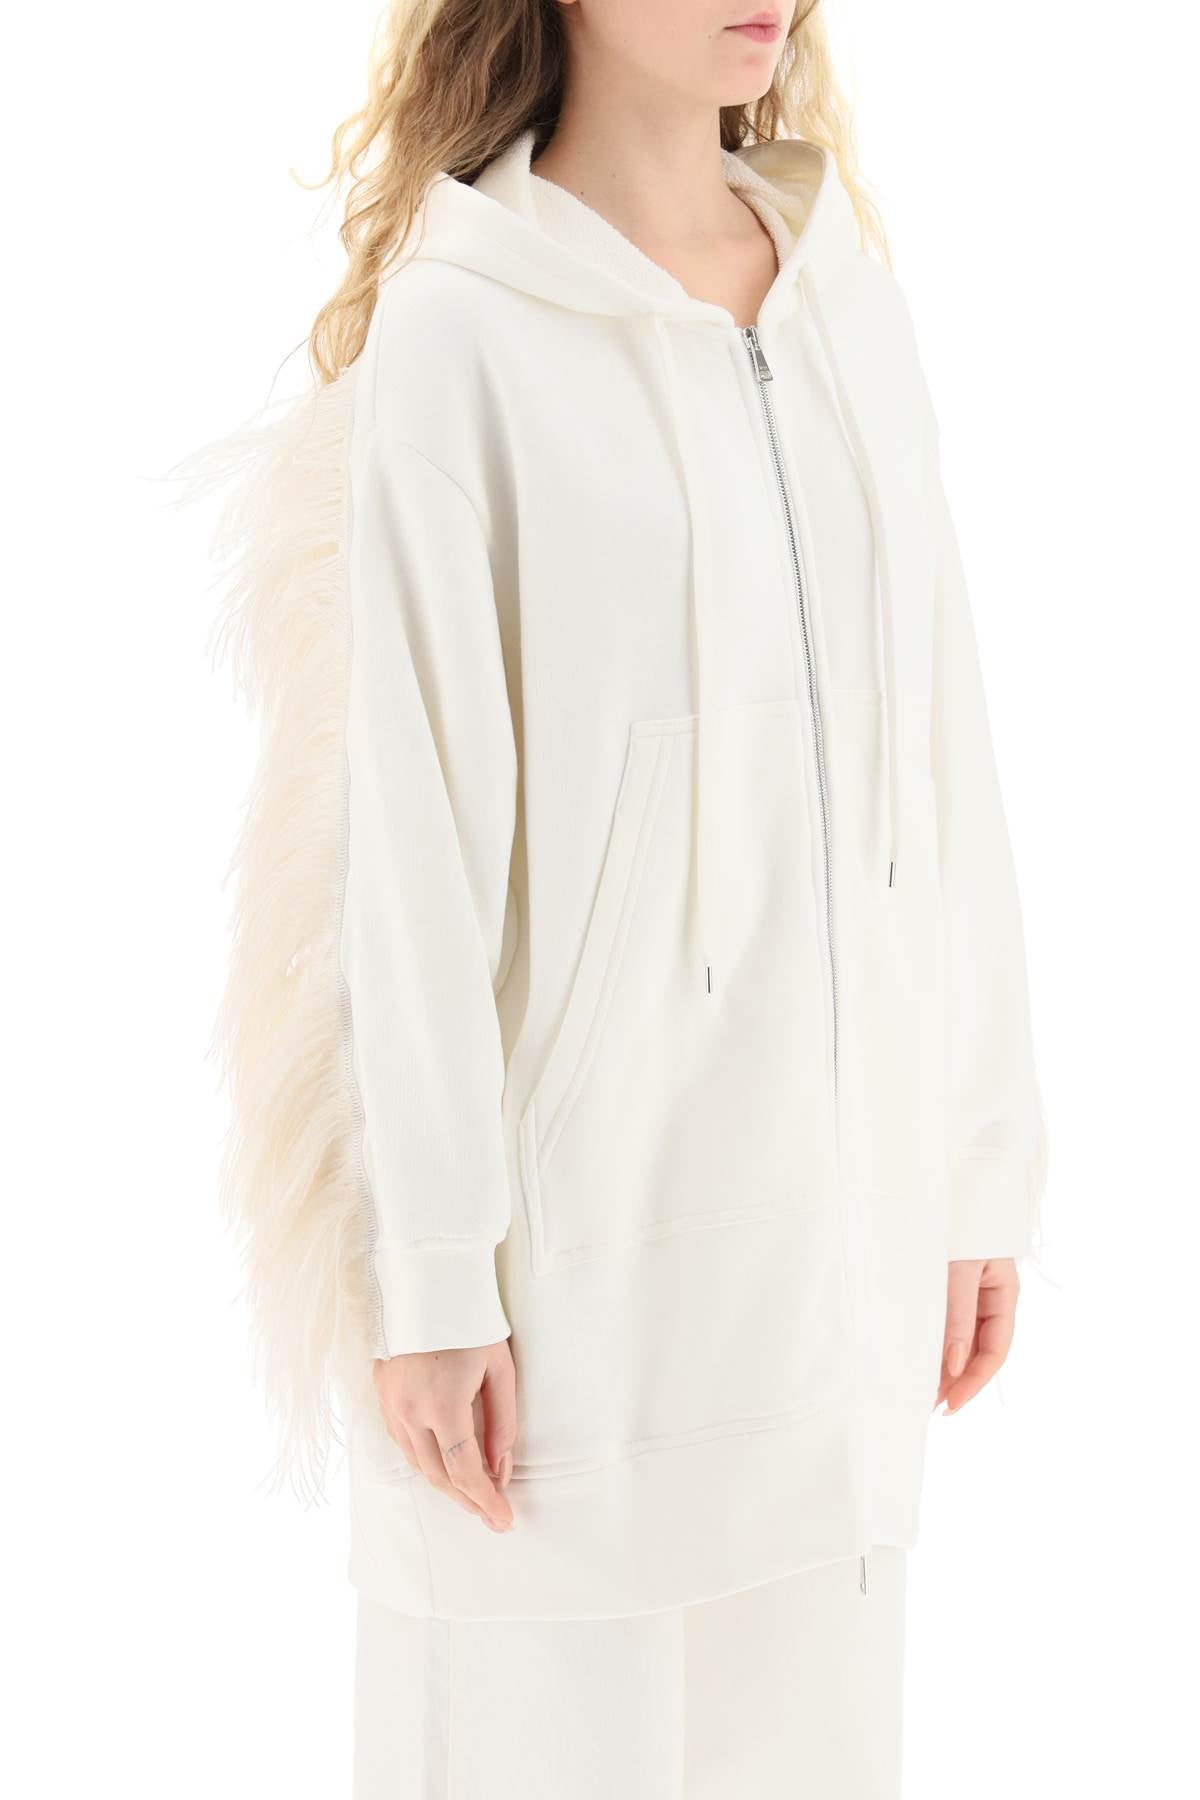 N.21 oversized hoodie with feathers-1